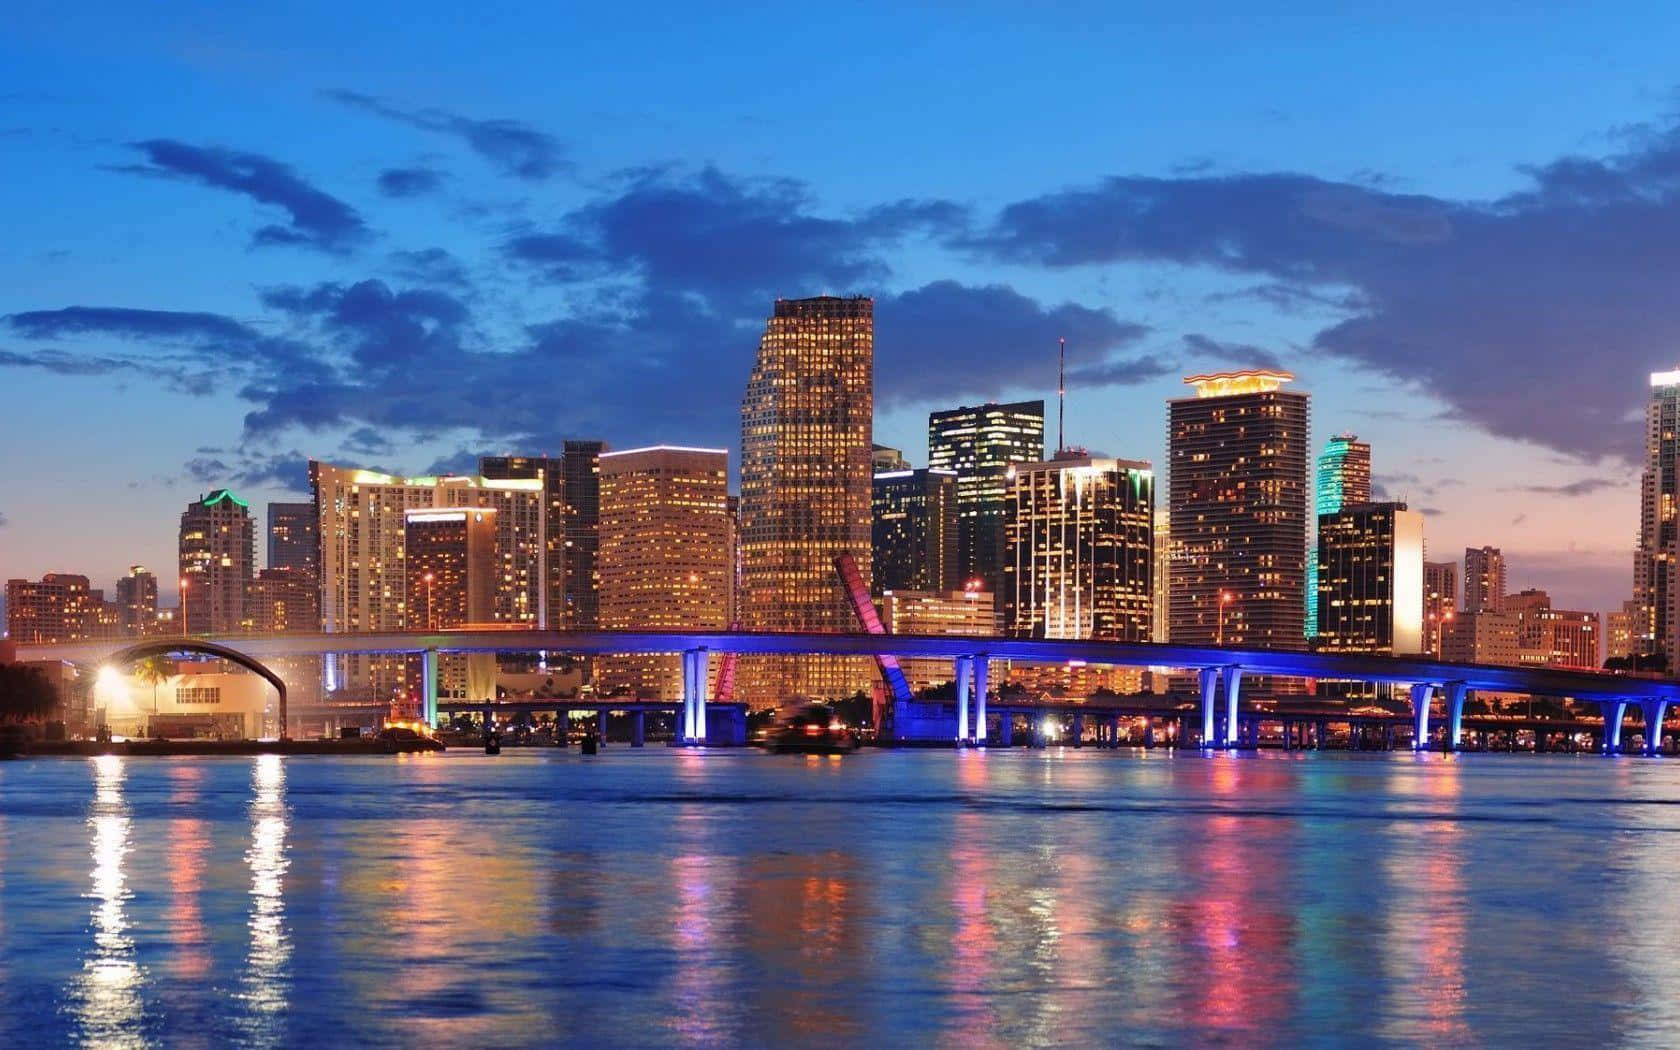 Explore the vibrant city of Miami and its beautiful skyline